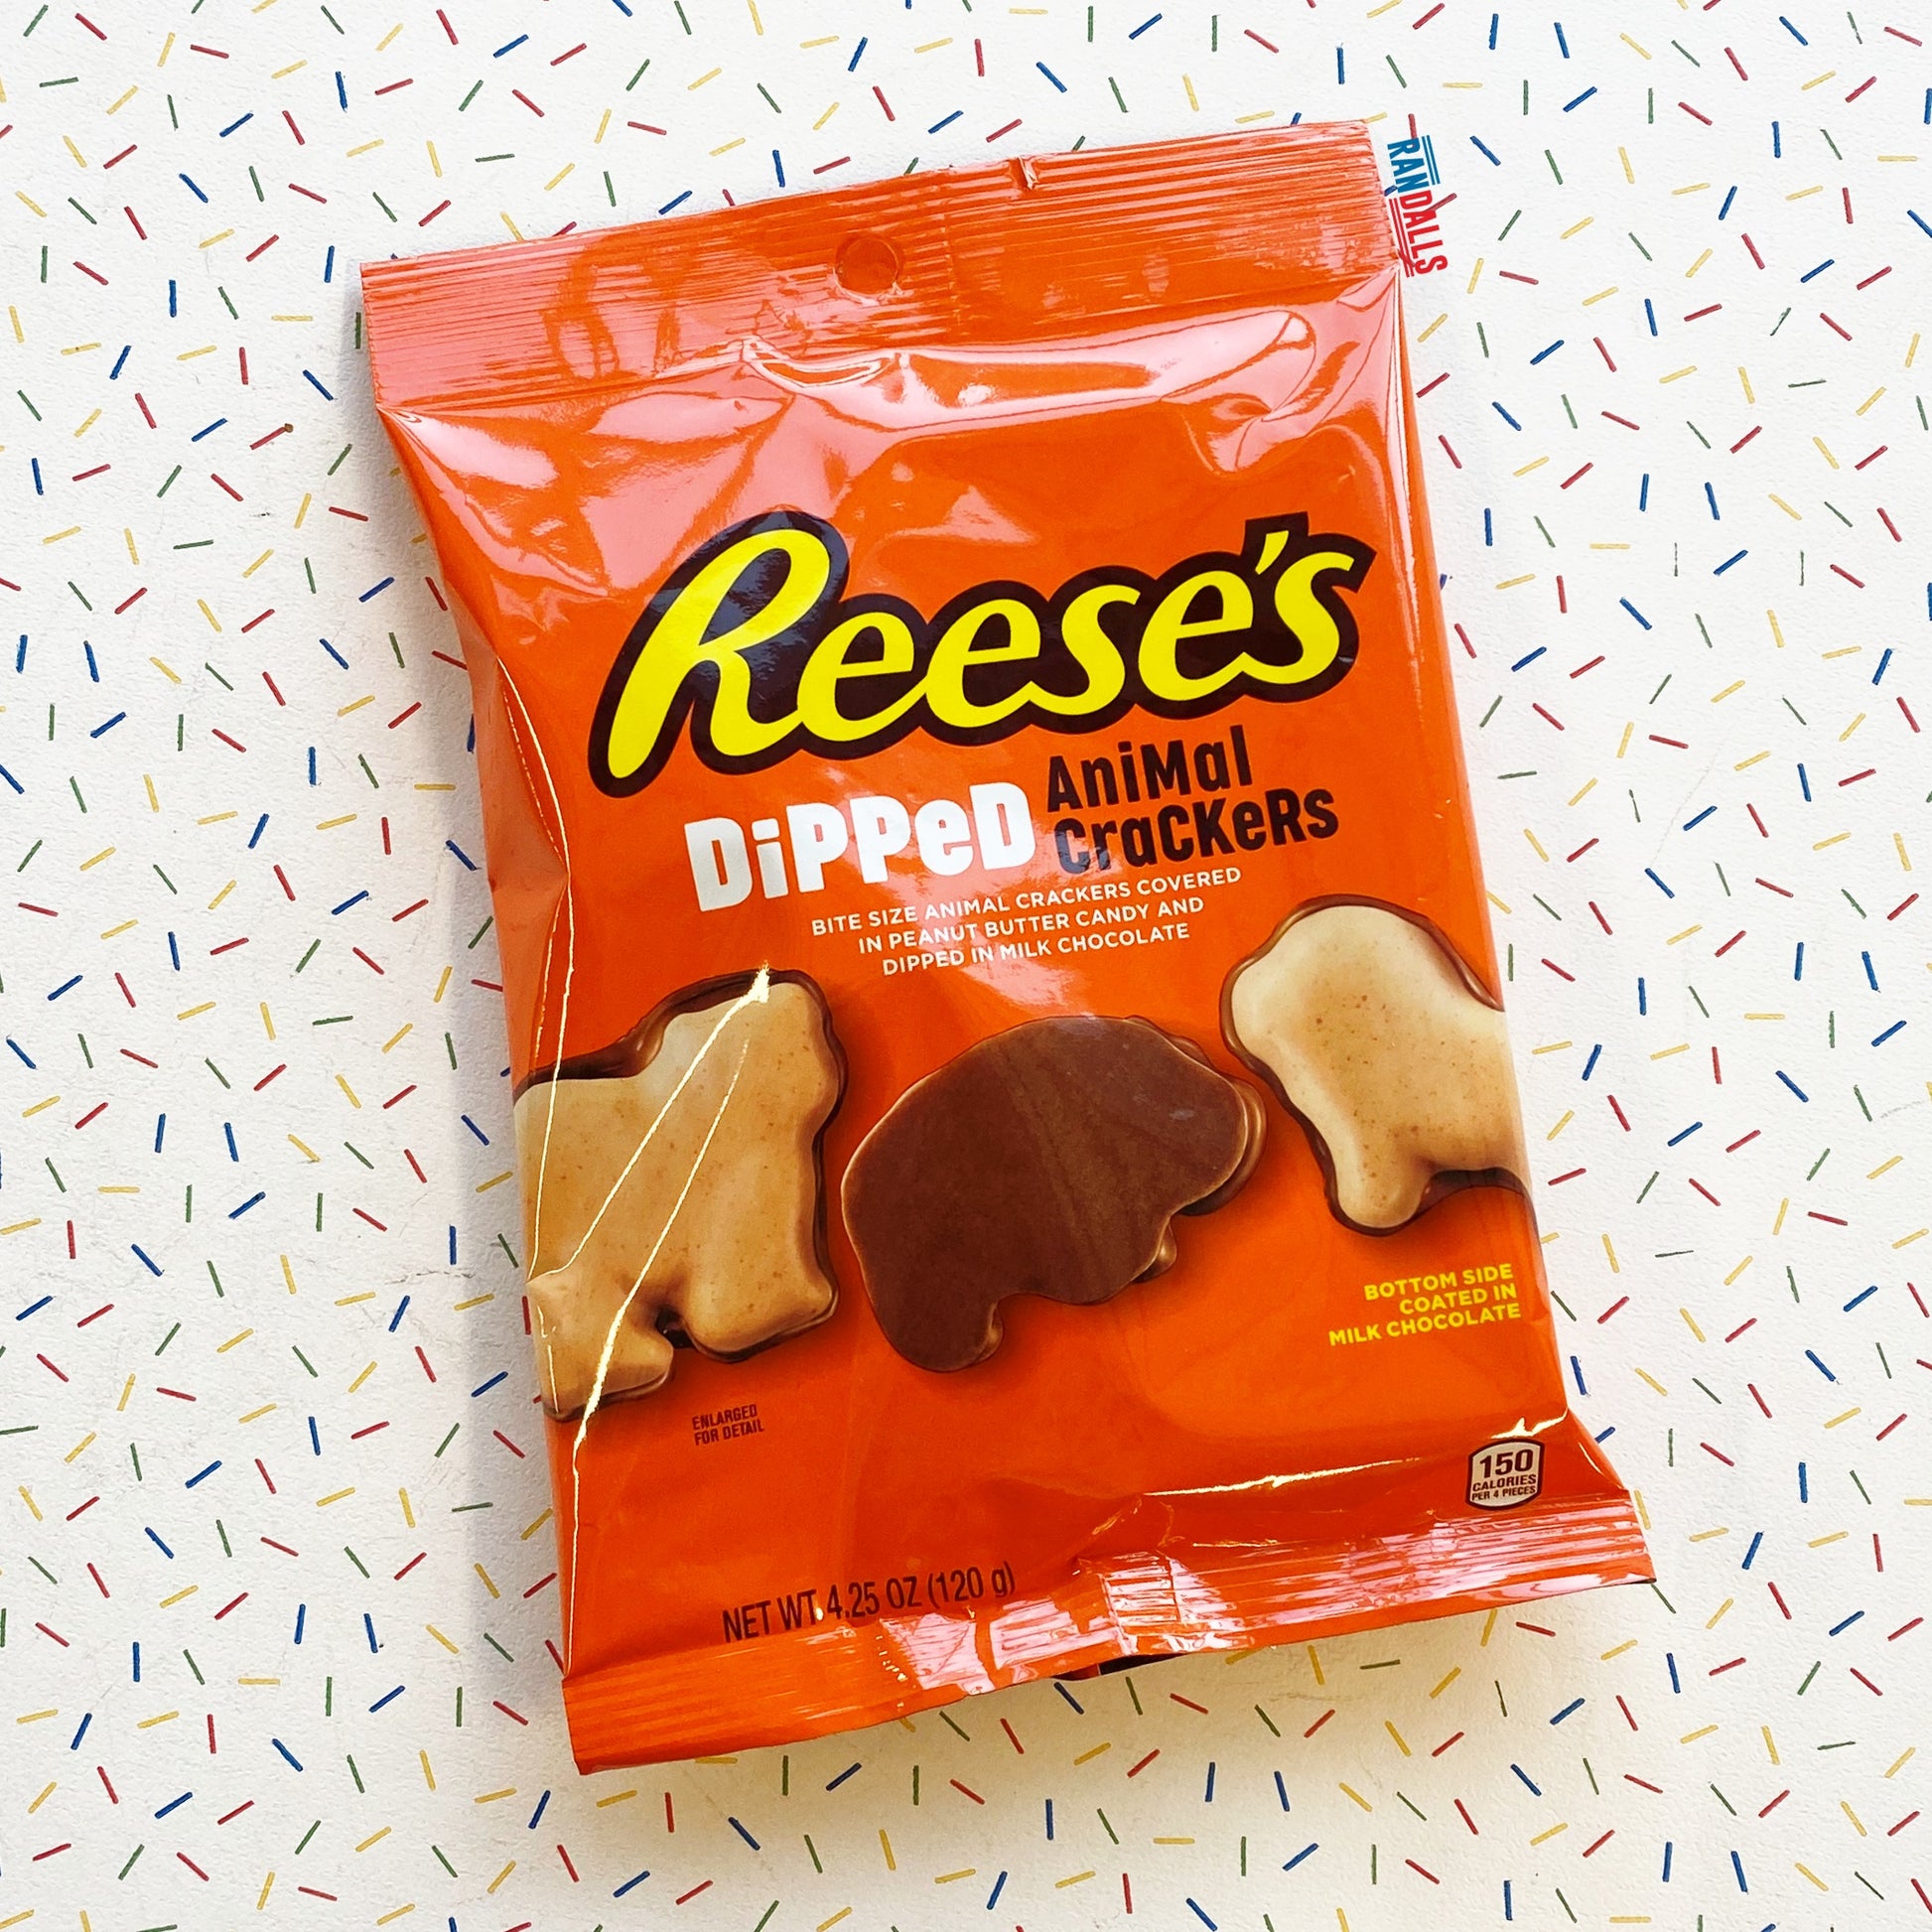 reese's dipped animal crackers, chocolate, snack, peanut butter, candy, milk chocolate, usa, randalls